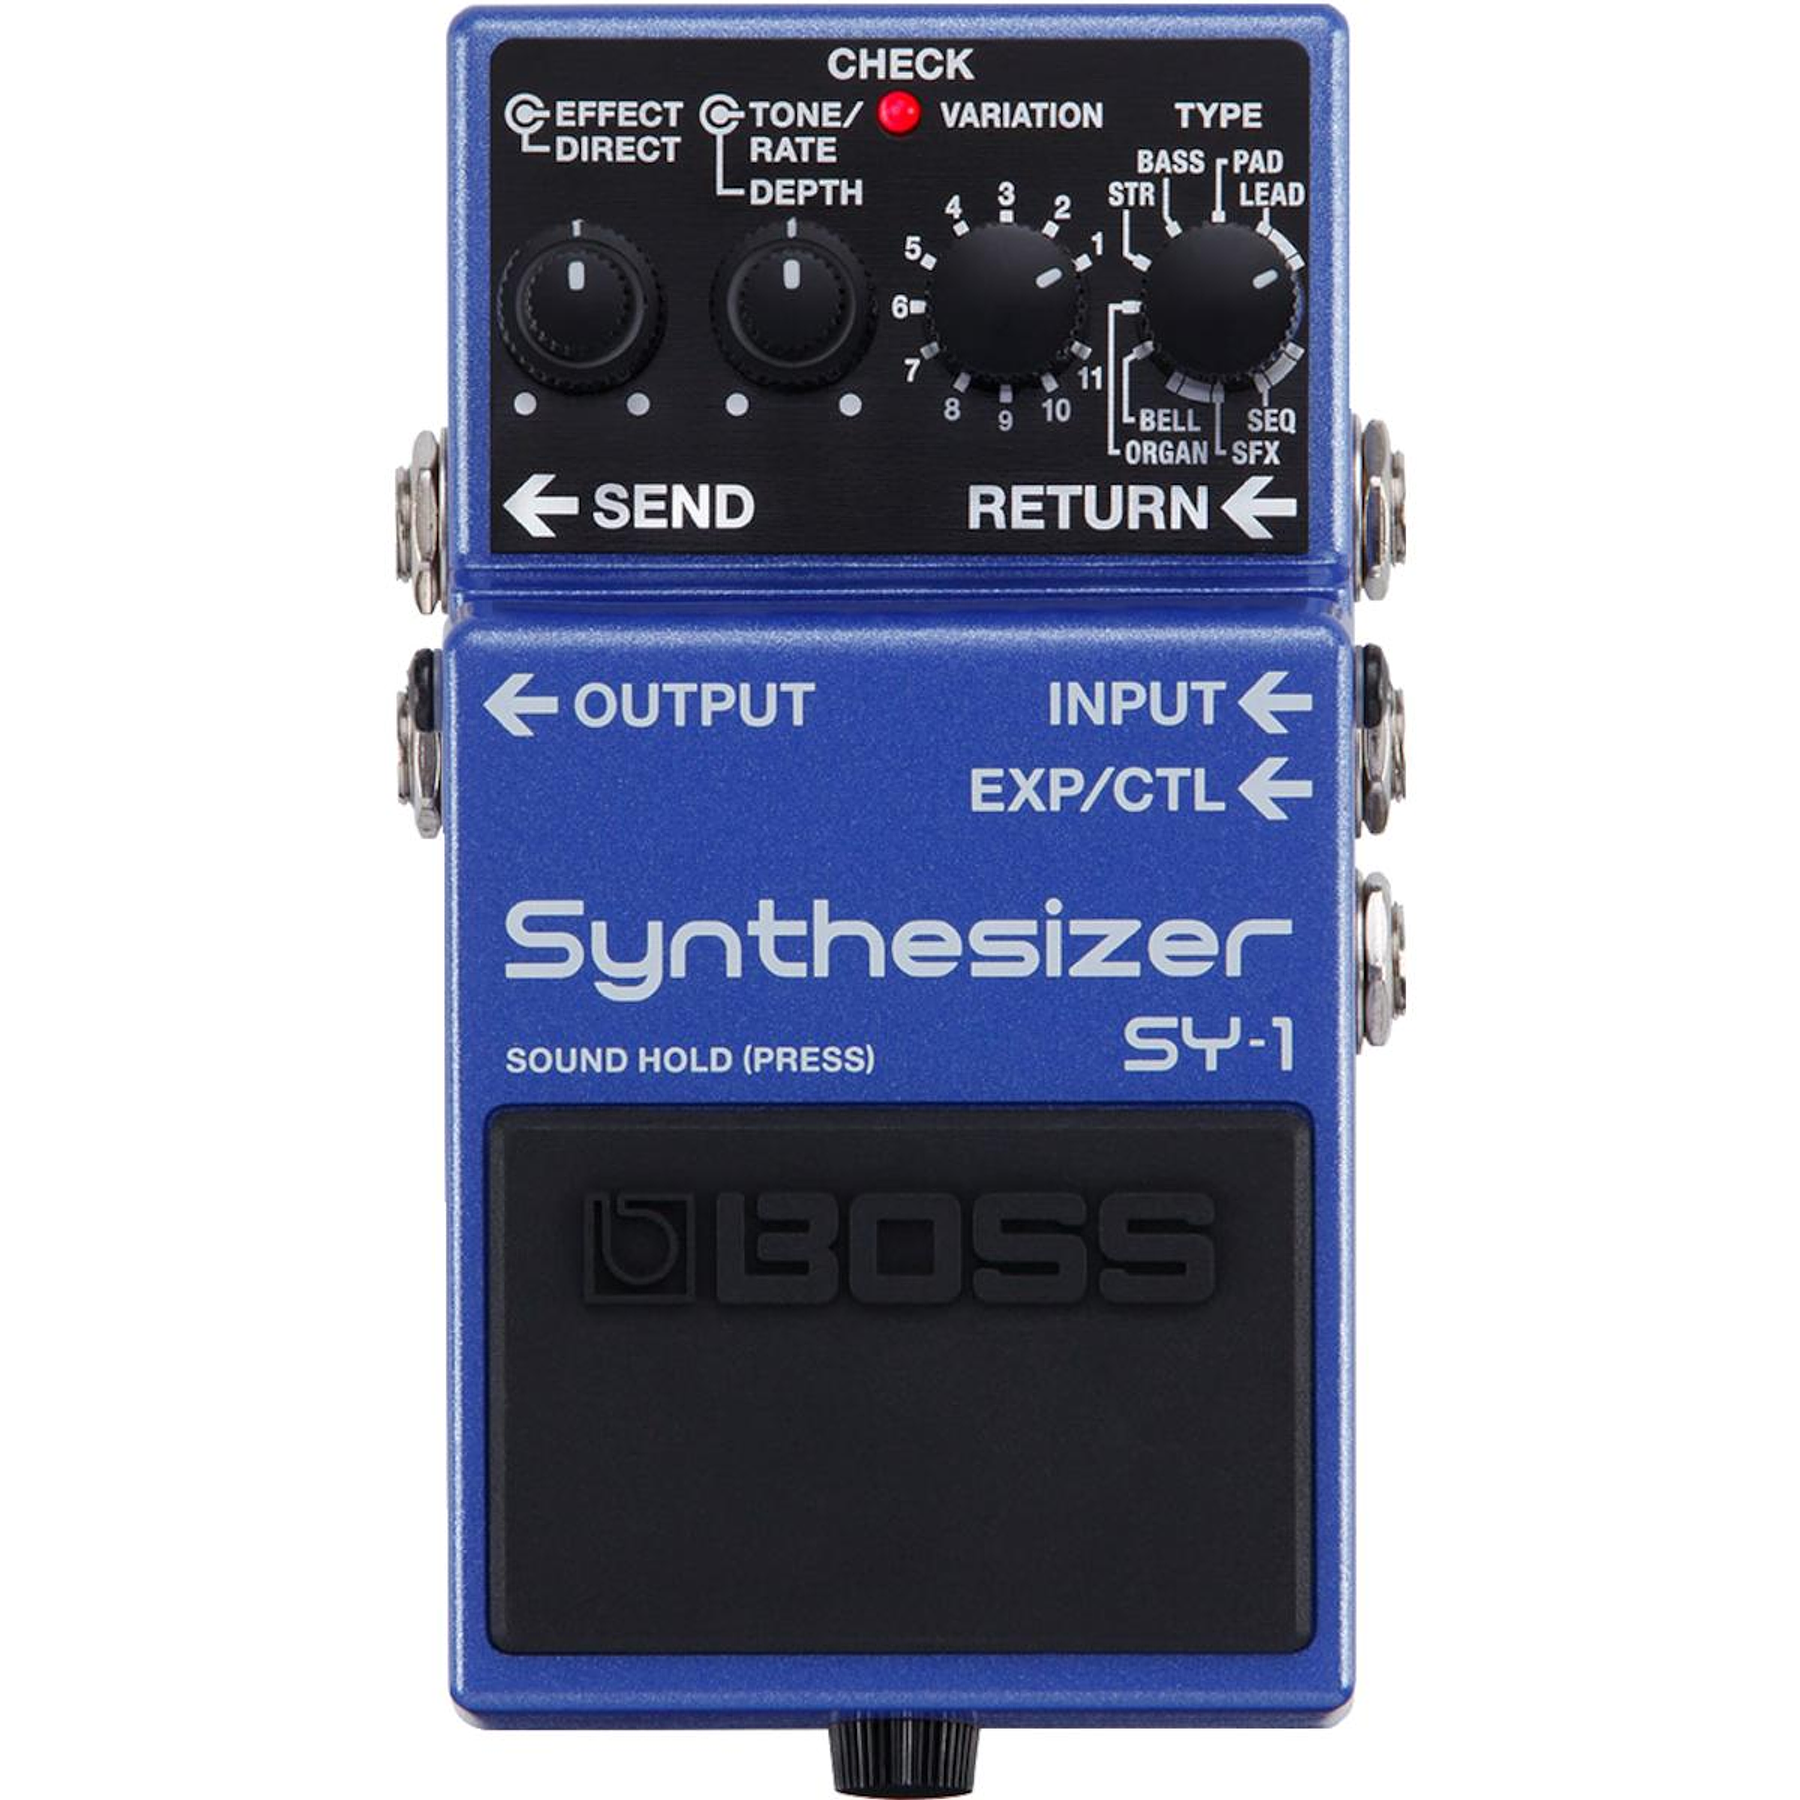 Pedal de efecto Boss SY-1 Synthesizer